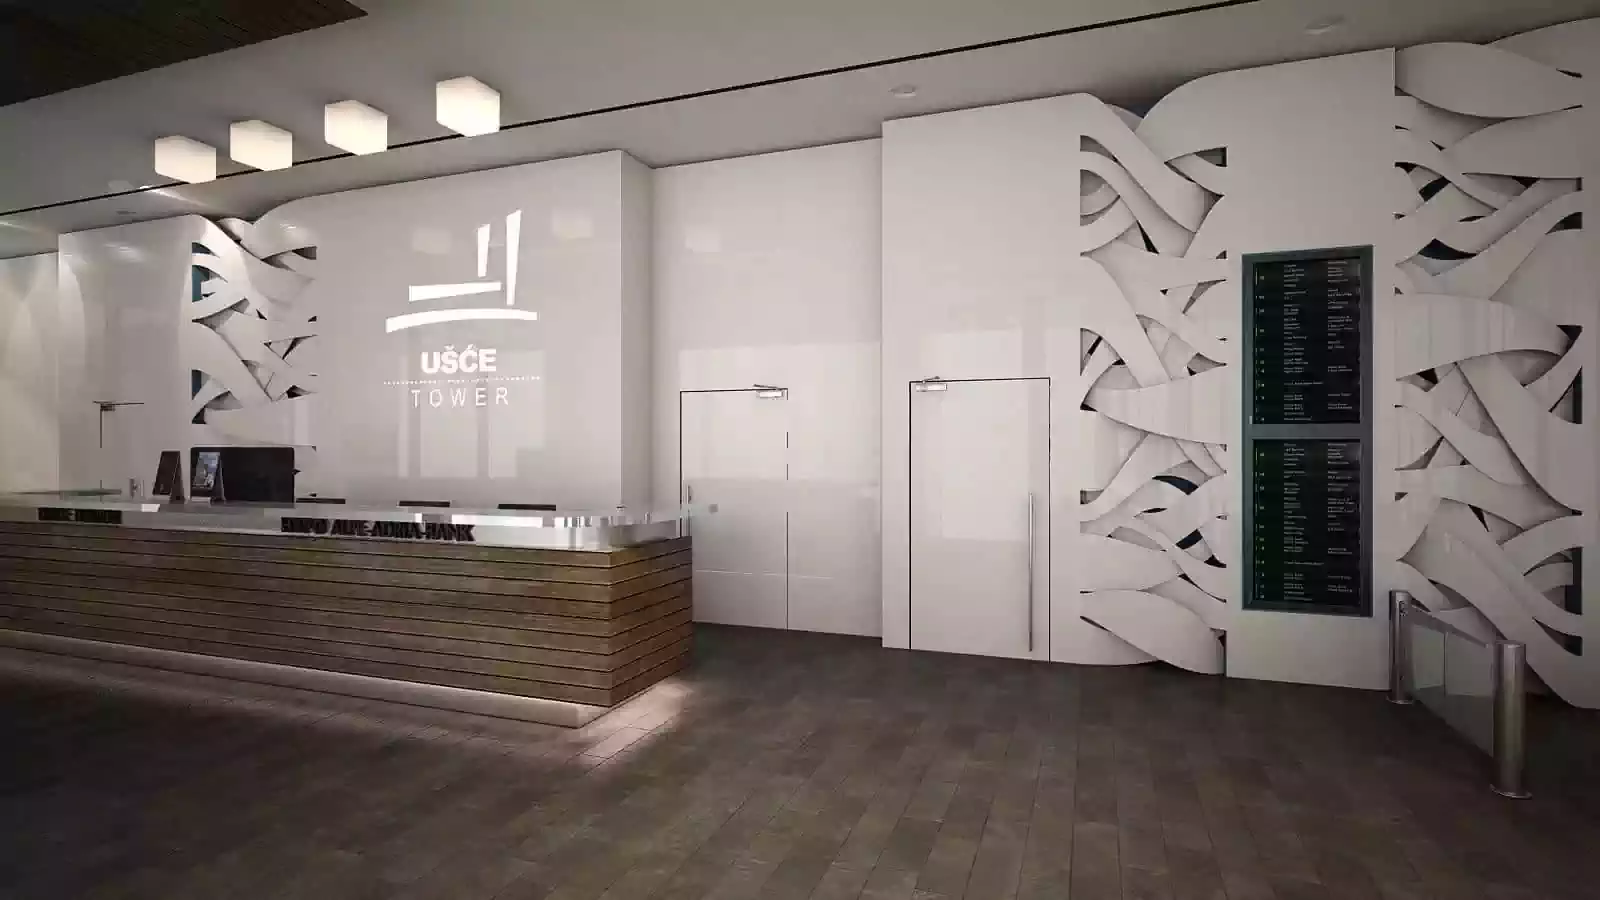 Organic interior design project proposal for reception lobby wall and desk made of a solid surface material like Corian